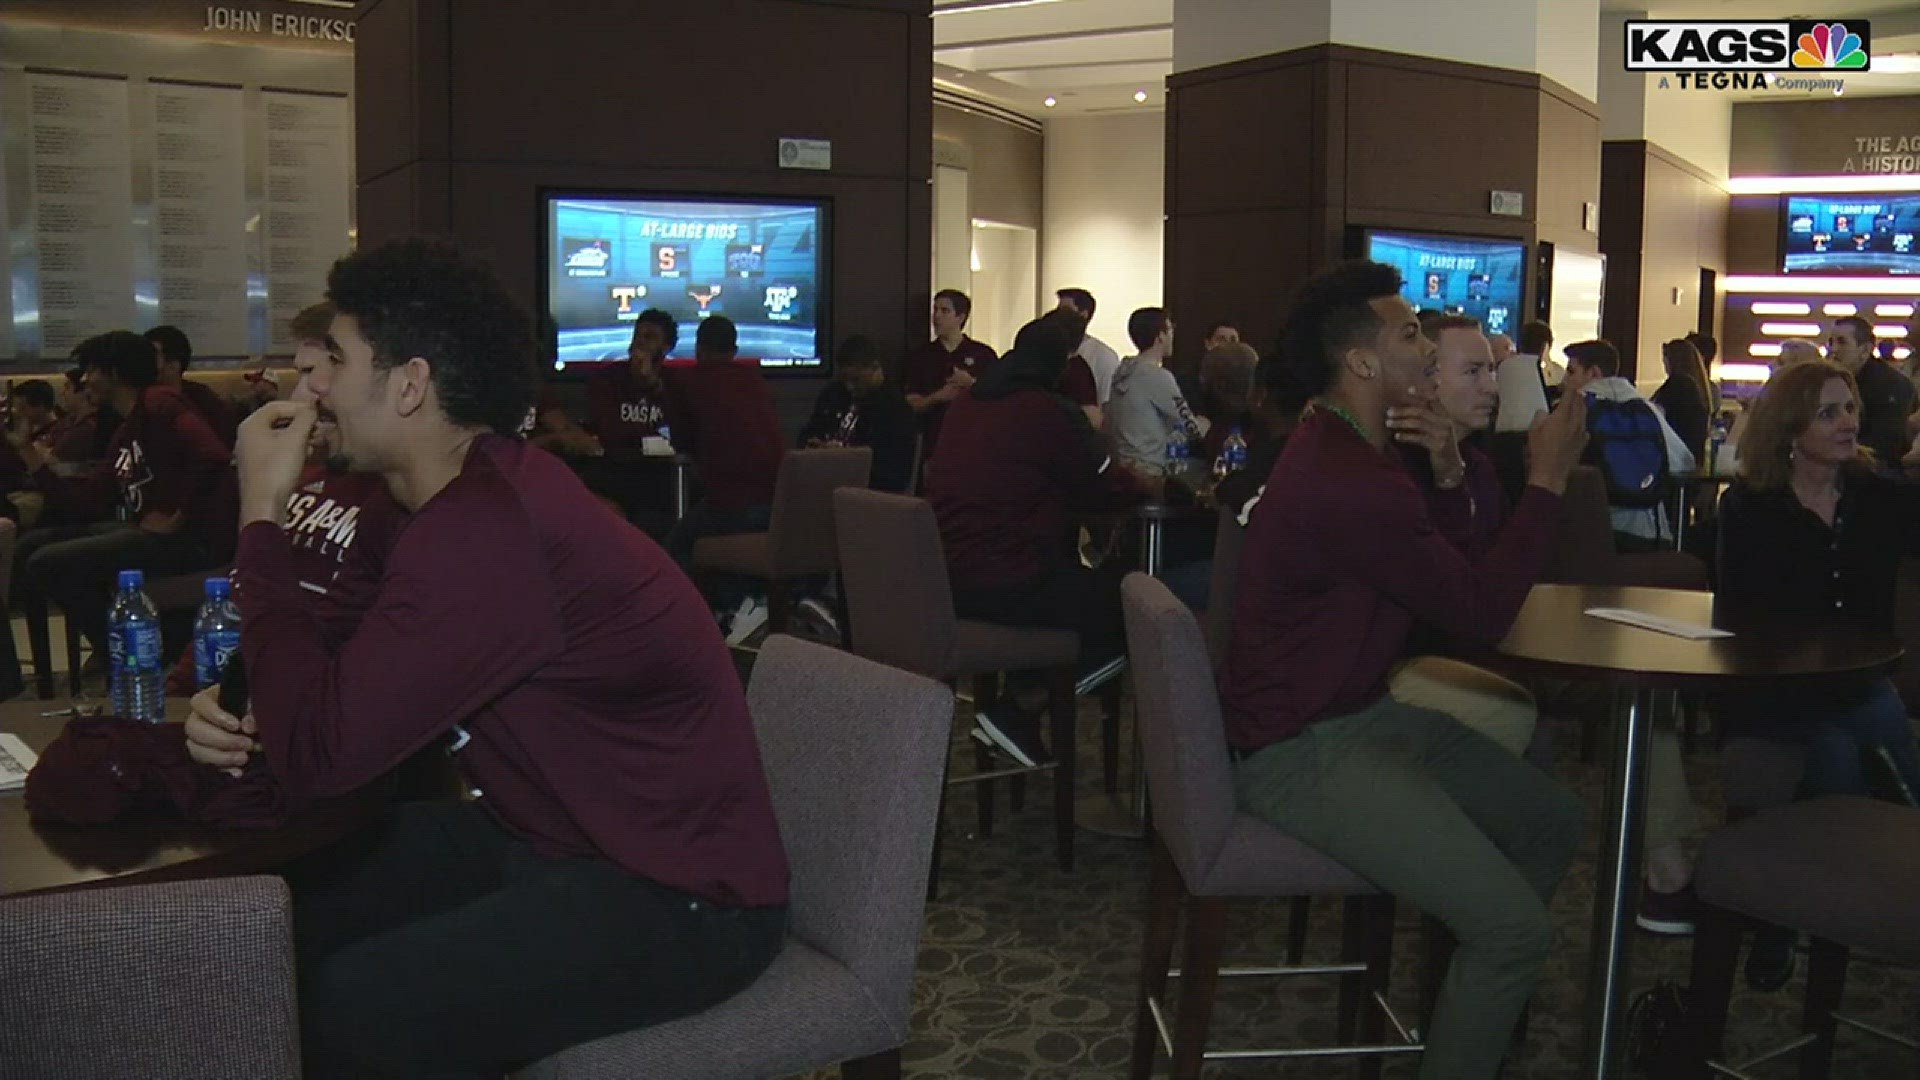 7-seed Texas A&M will face 10-seed Providence in the first round of the NCAA Tournament Friday in Charlotte.